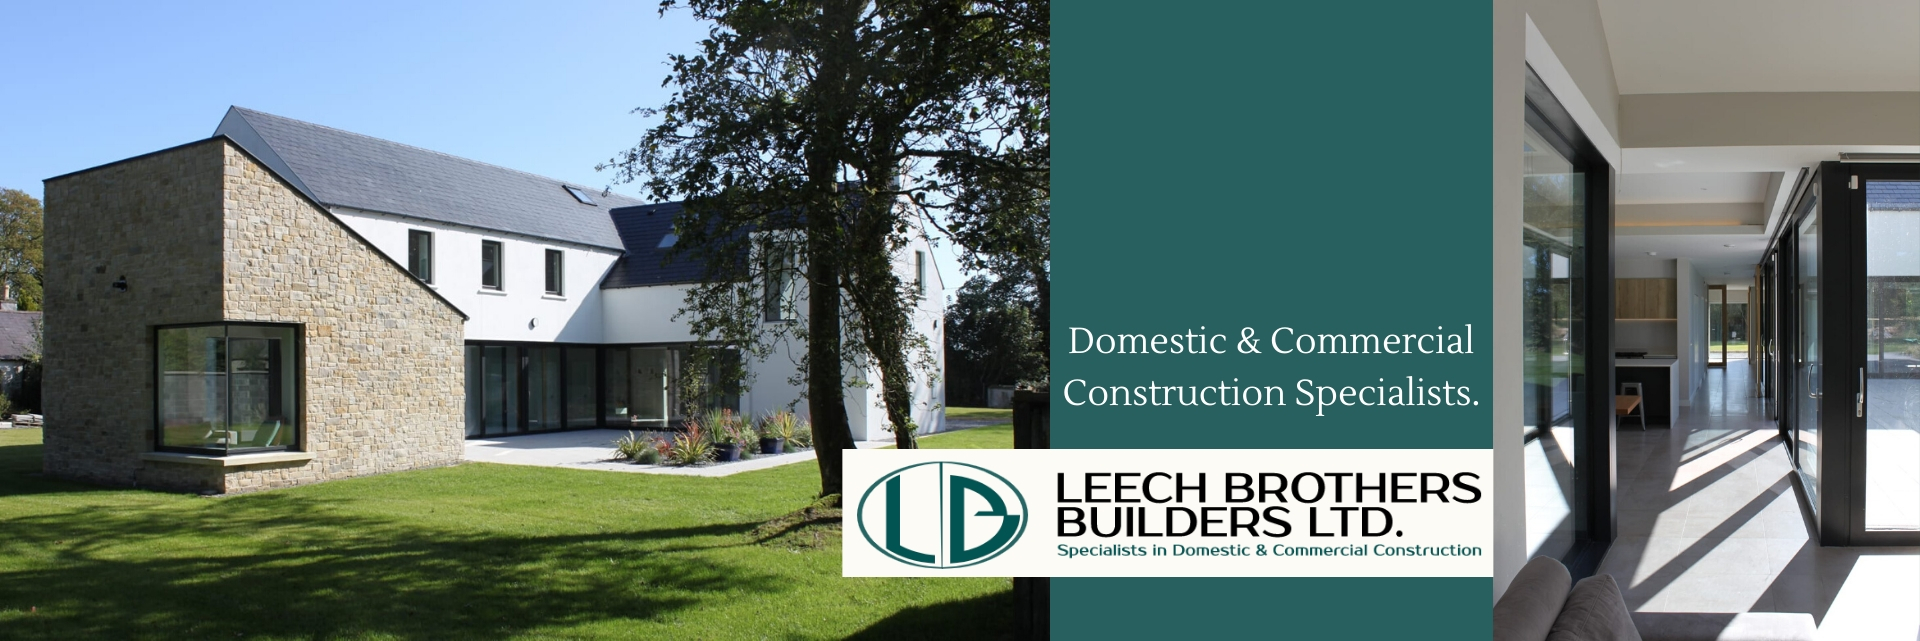 Specialists in Domestic & Commercial Construction